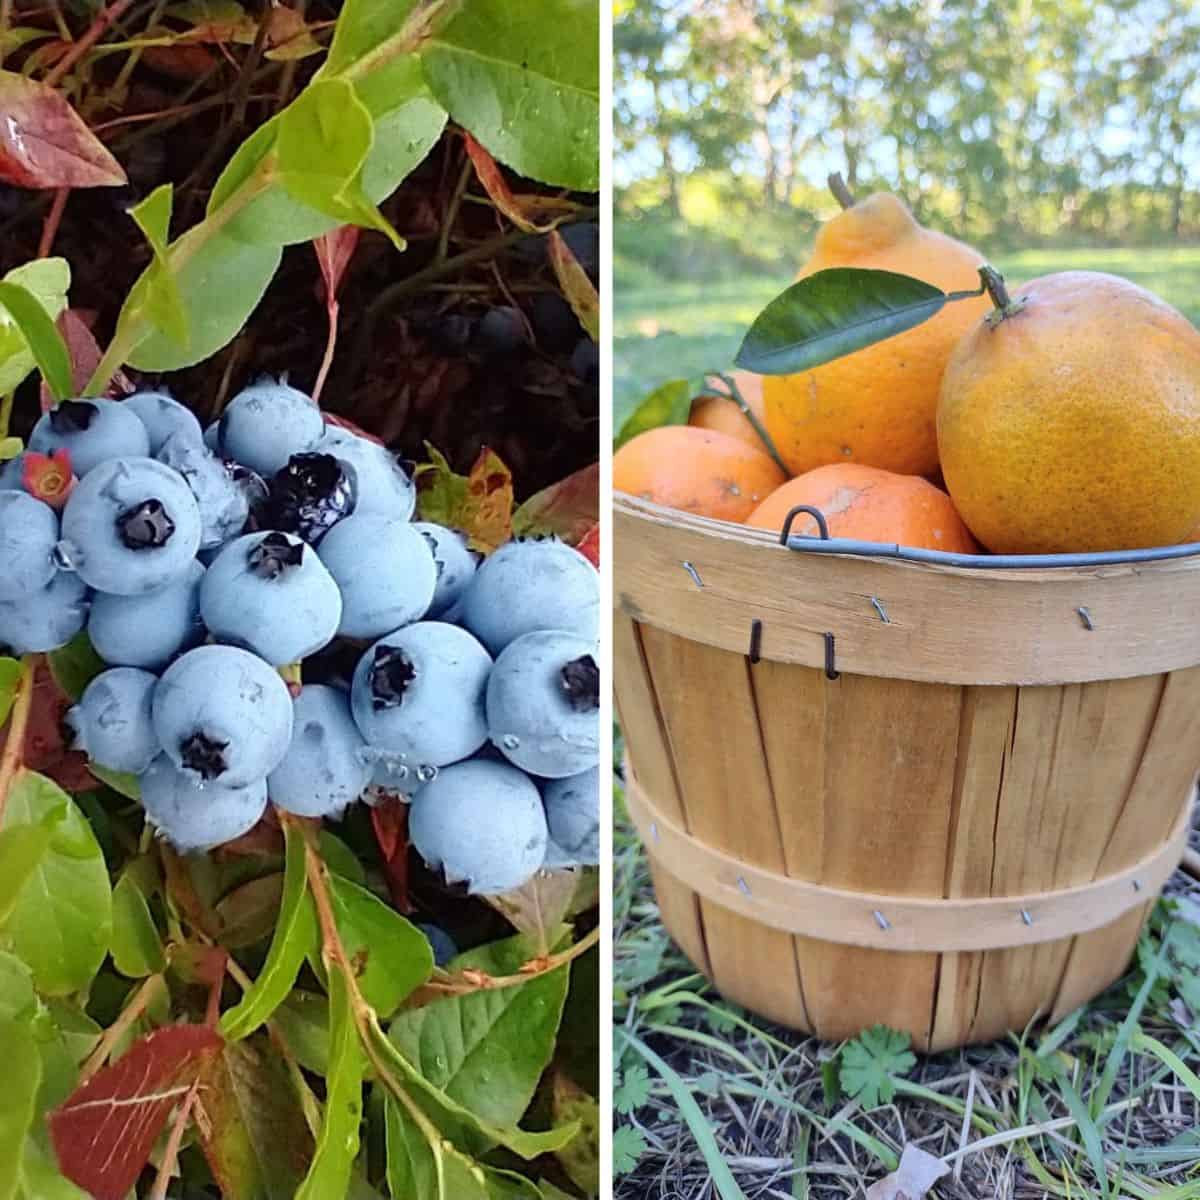 A close up of wild Maine blueberries growing in a lowbush next to a picture of a basket of Honeybell oranges from Florida.